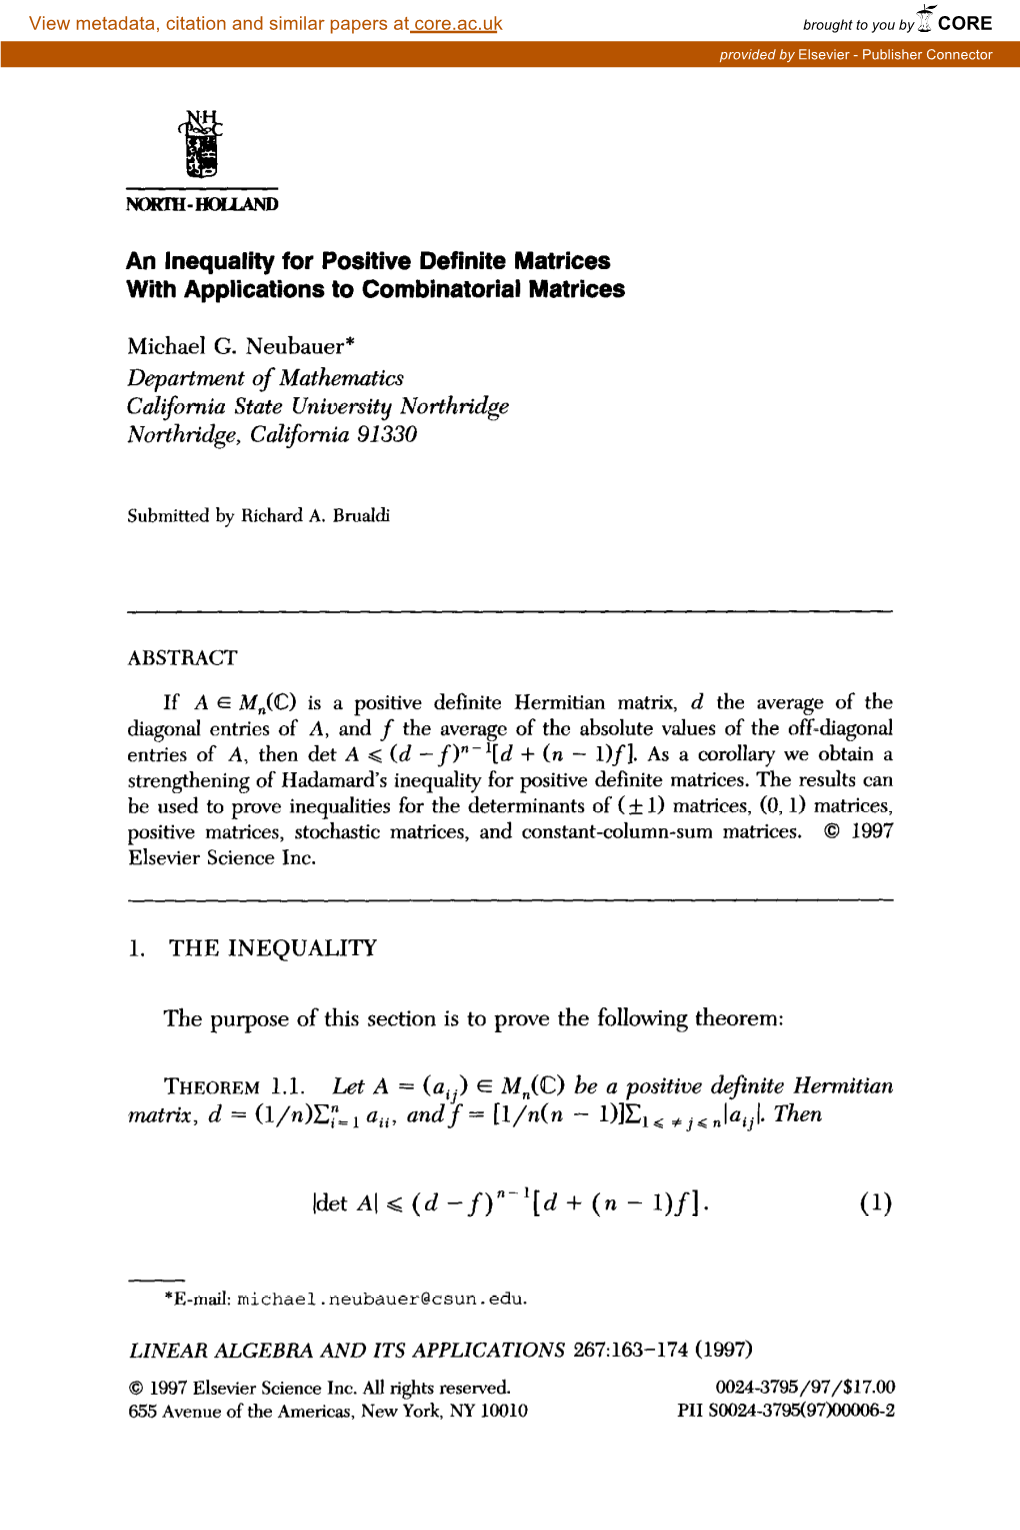 An Inequality for Positive Definite Matrices with Applications to Combinatorial Matrices